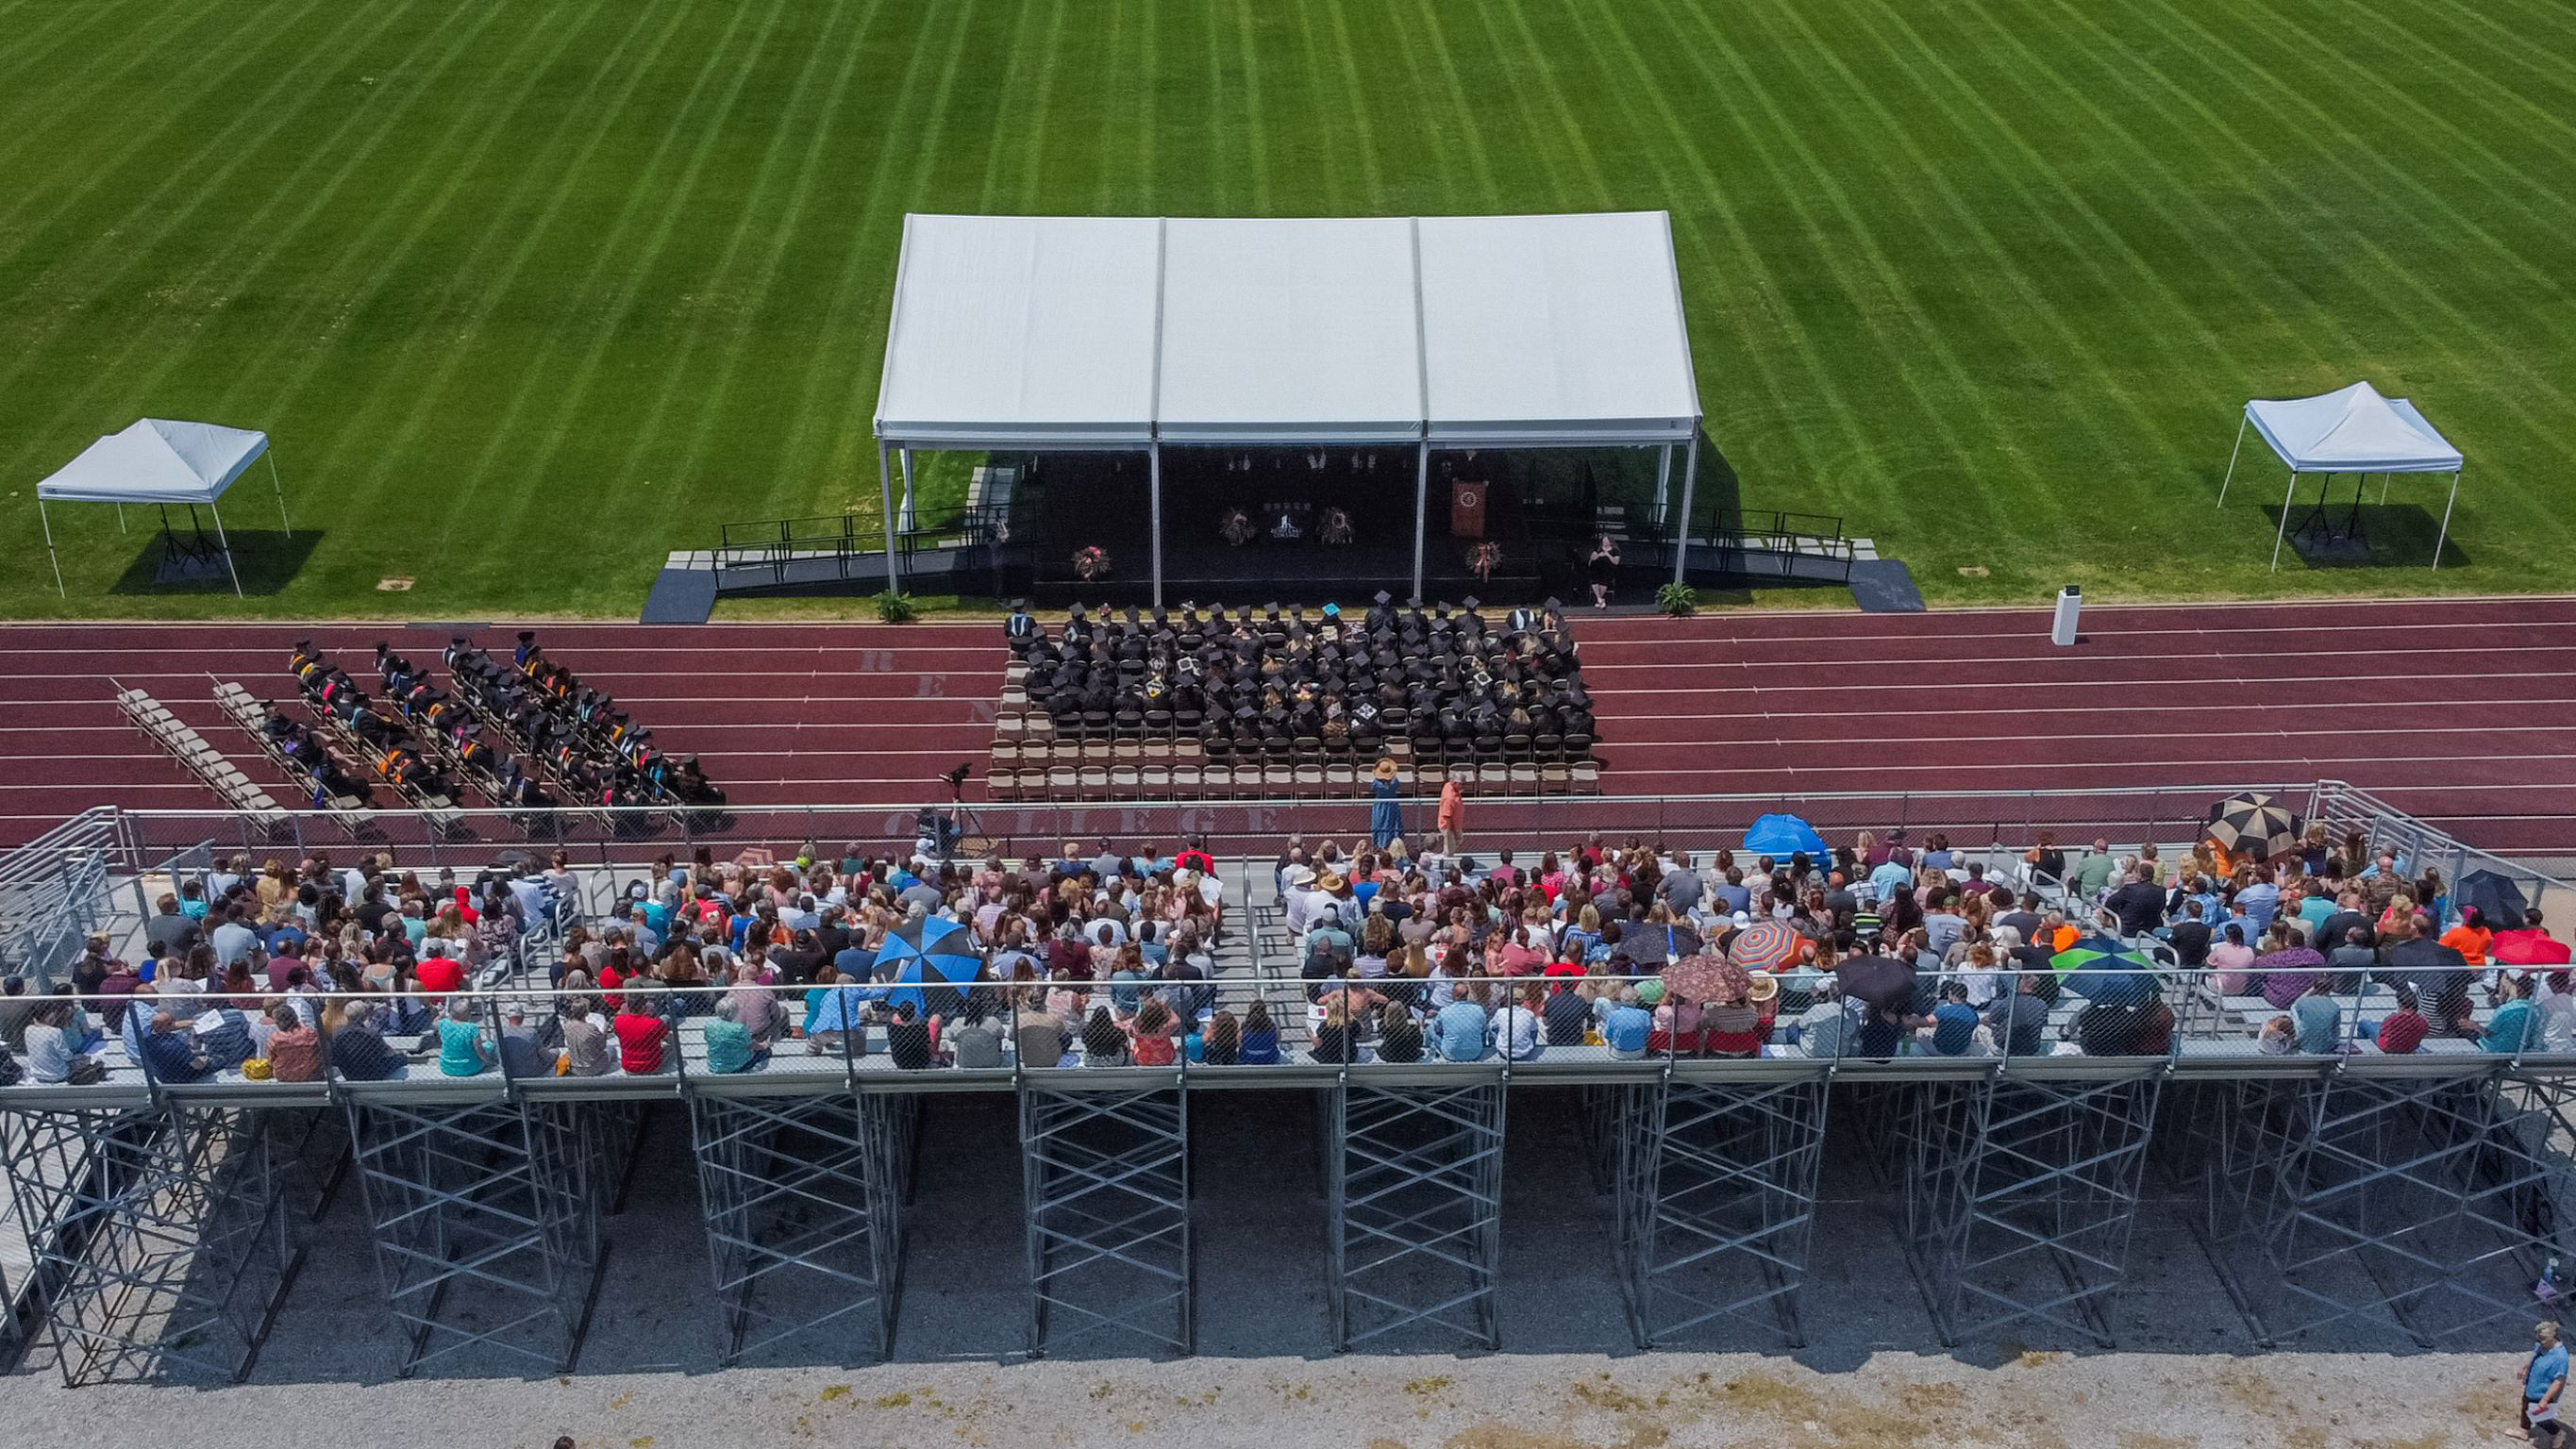 REND LAKE COLLEGE ANNOUNCES GRADUATING CLASS OF 2022